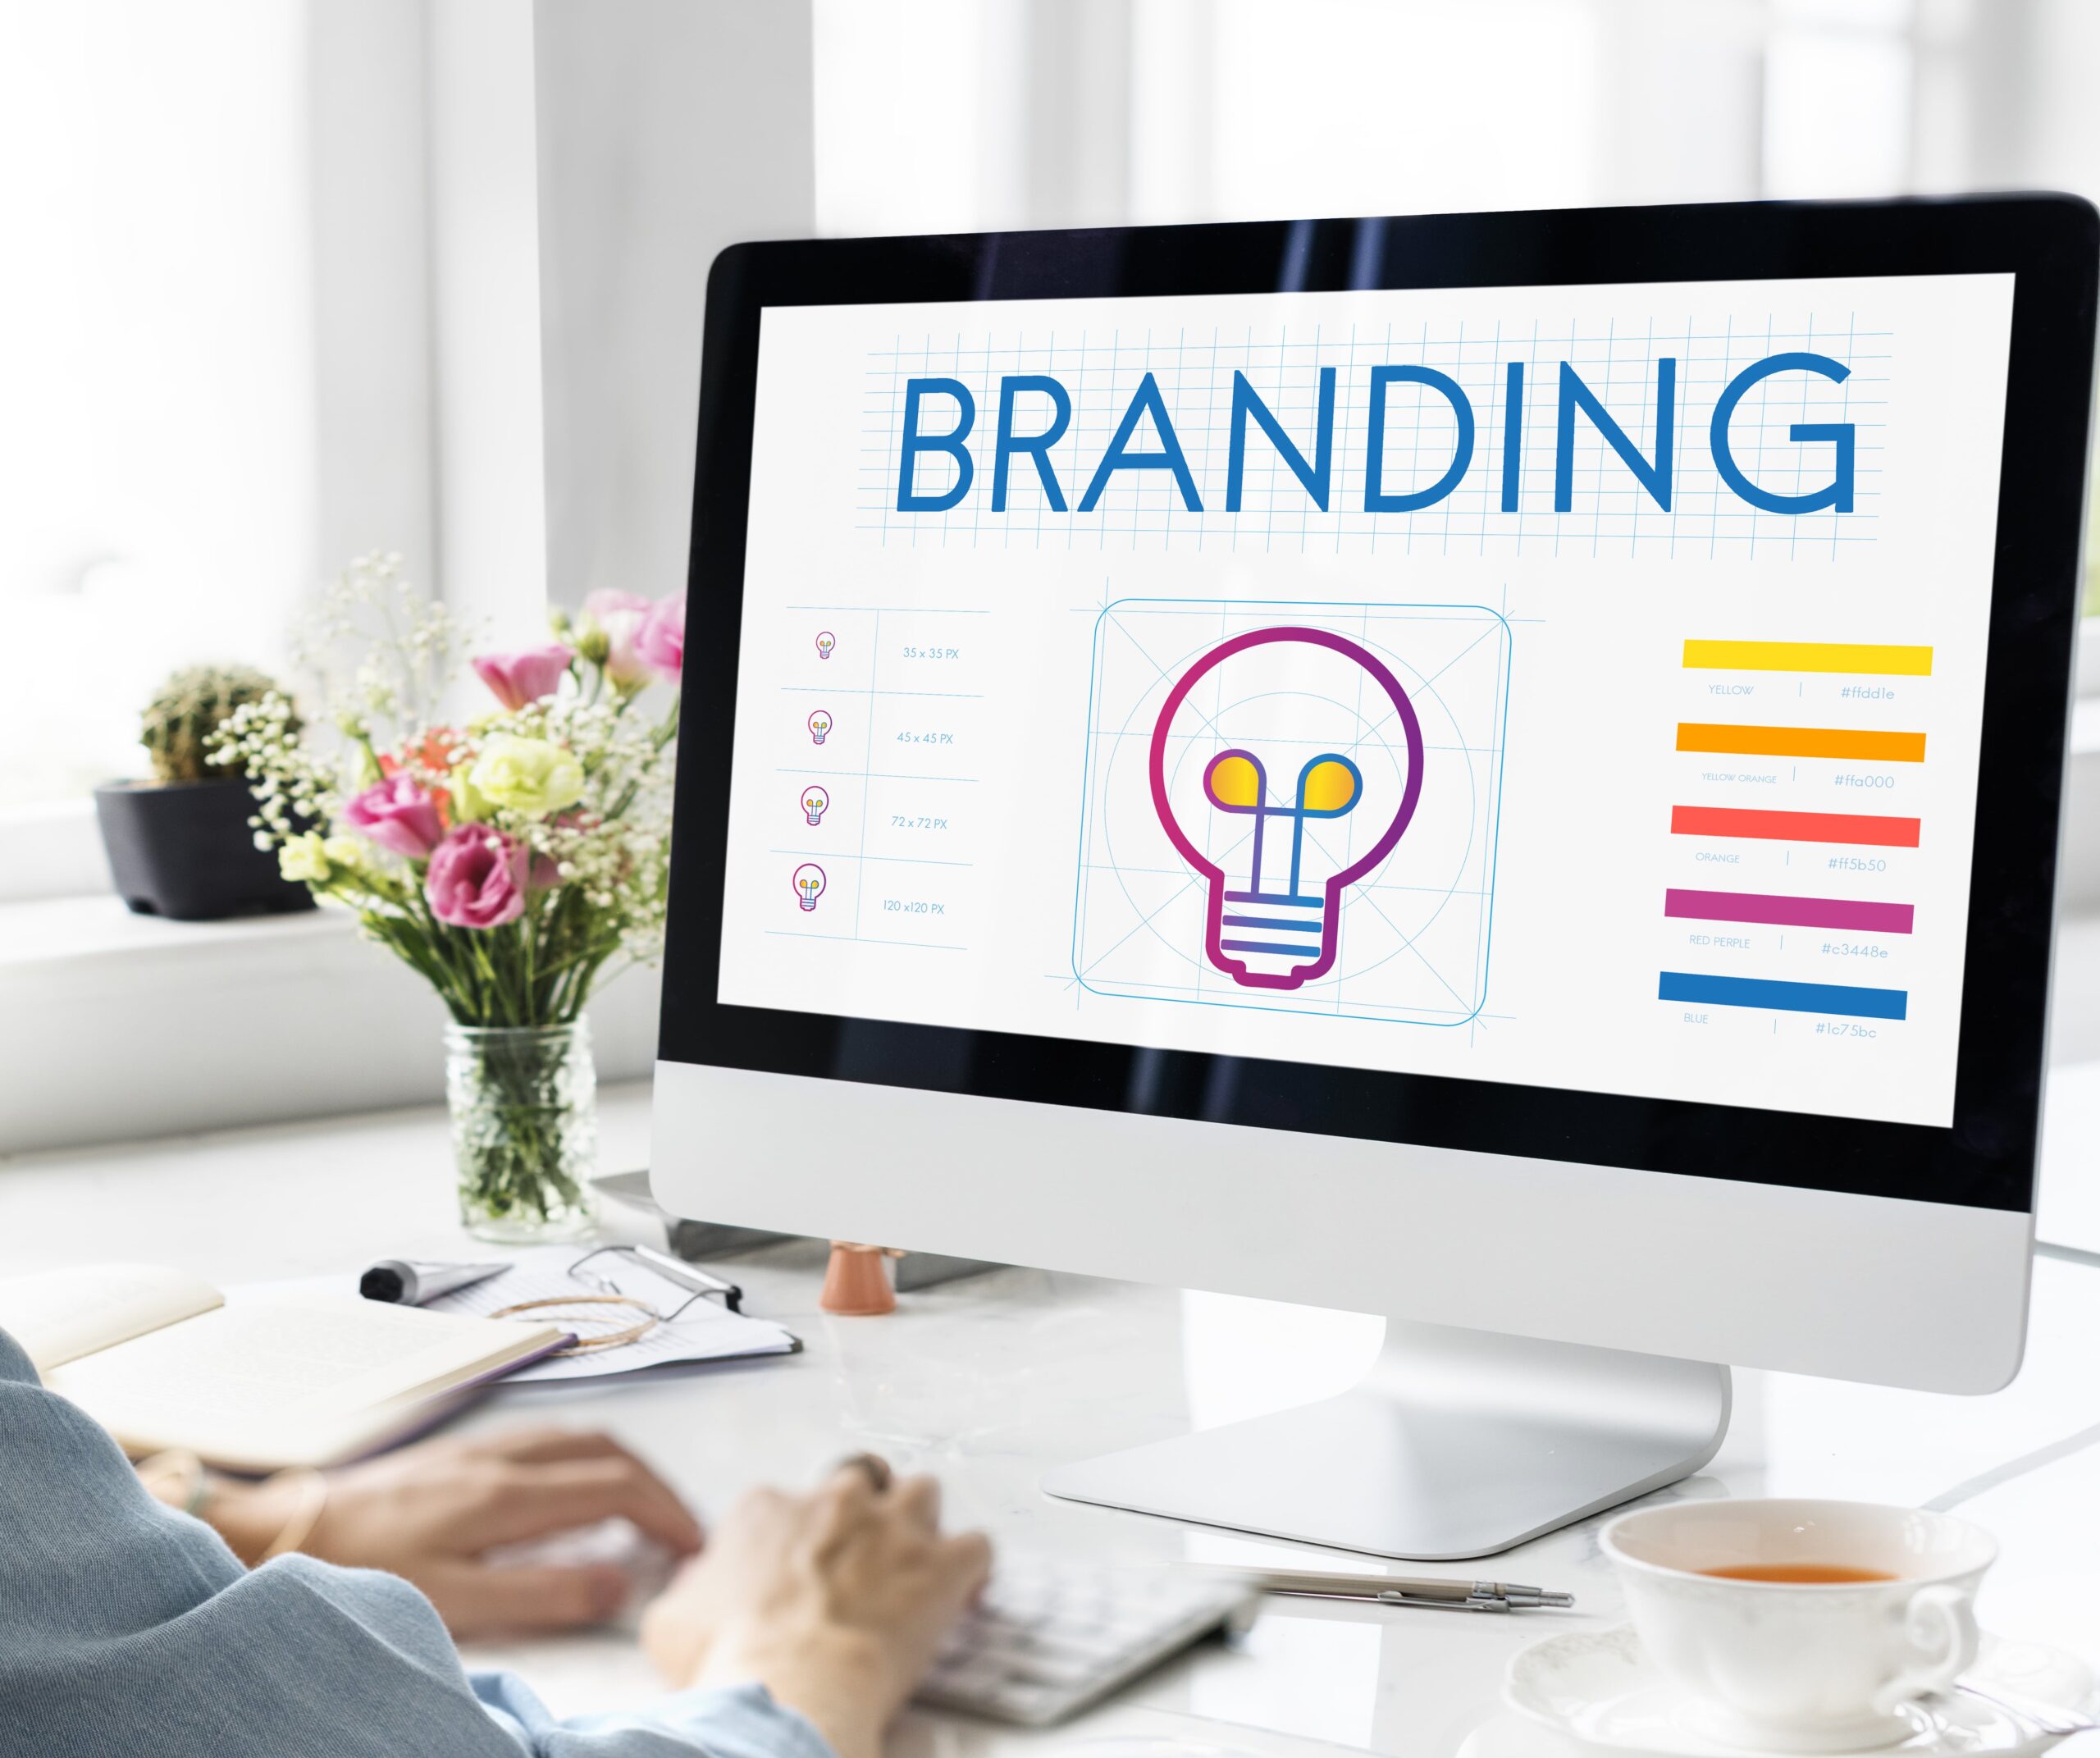 Brand Identity: What It Is and How To Build One